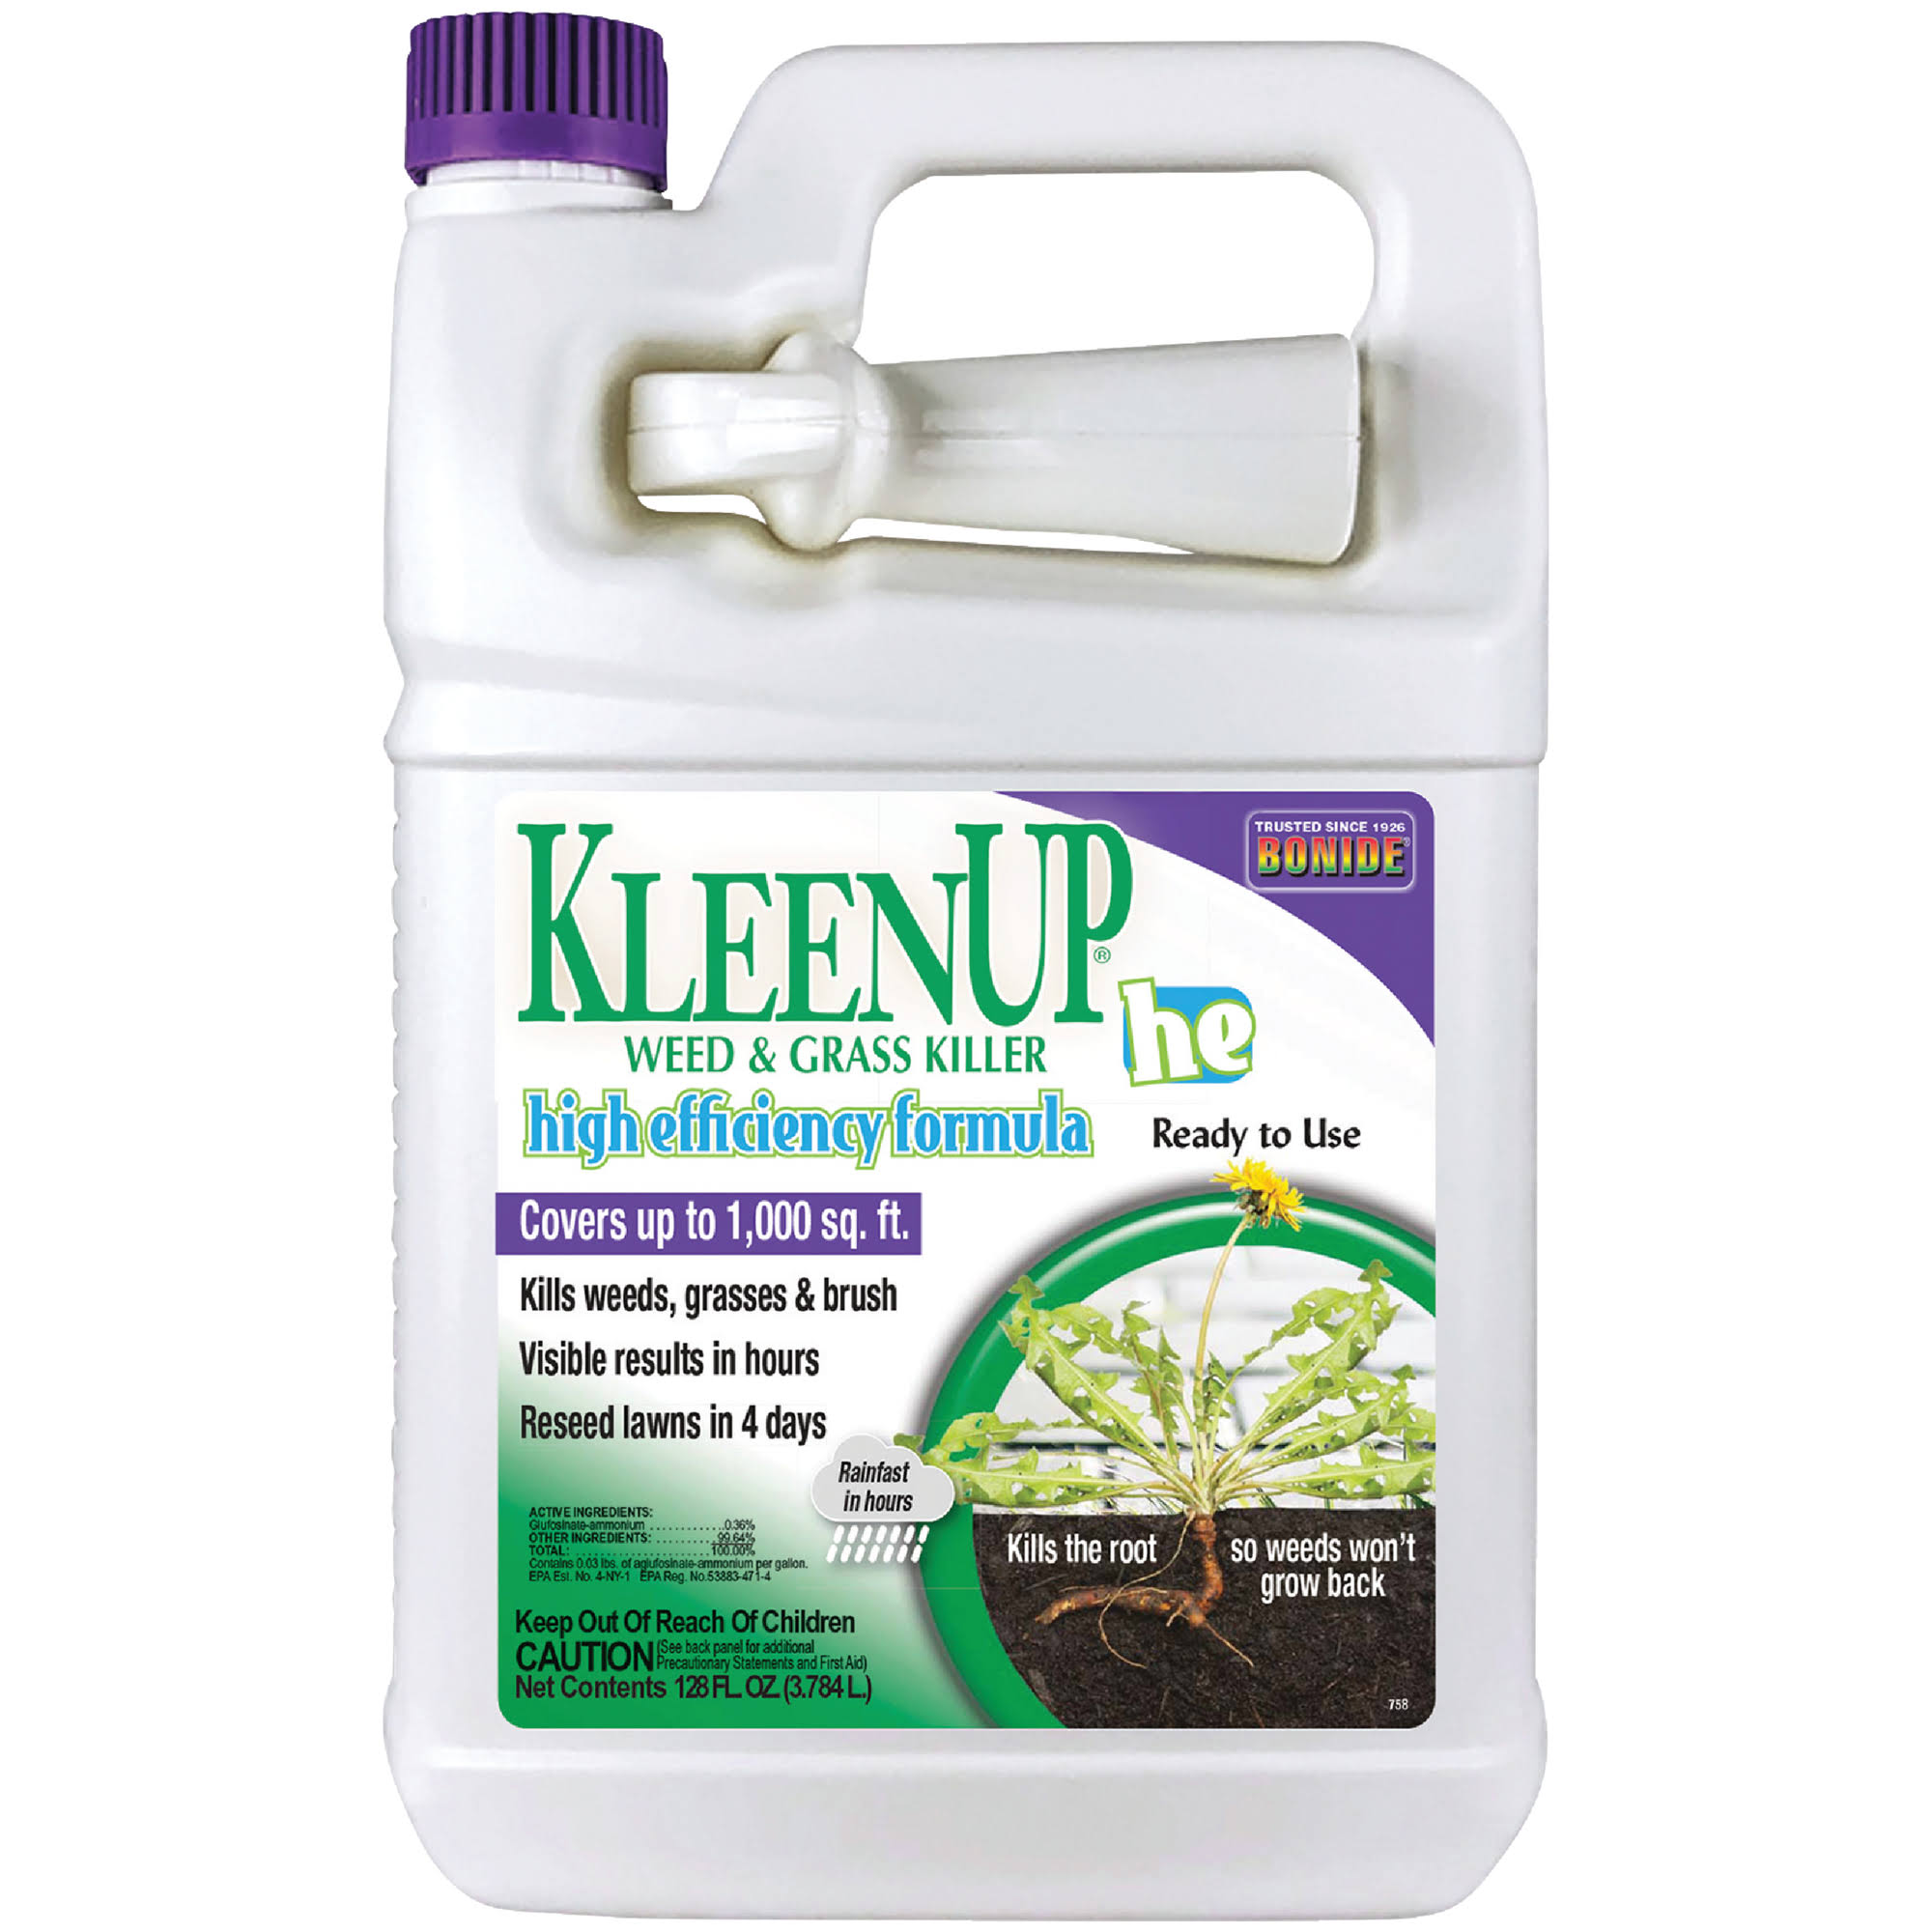 Bonide KleenUP 758 Weed and Grass Killer Ready-to-Use, Liquid, Off-White/Yellow, 1 Gal 4 Pack